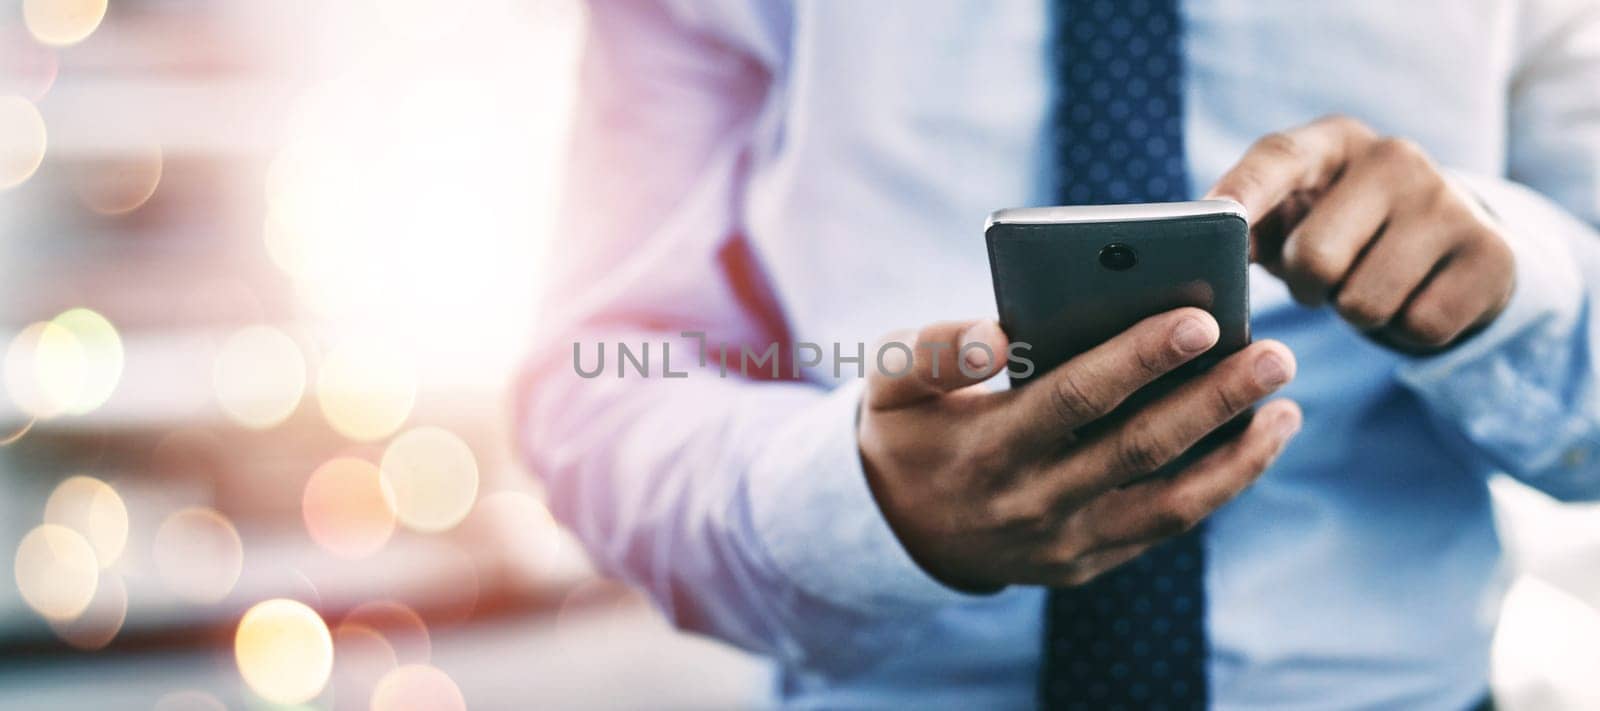 Businessman, phone and hands typing for communication or networking on bokeh background at office. Closeup of man on mobile smartphone app for online texting, chatting or social media and research.